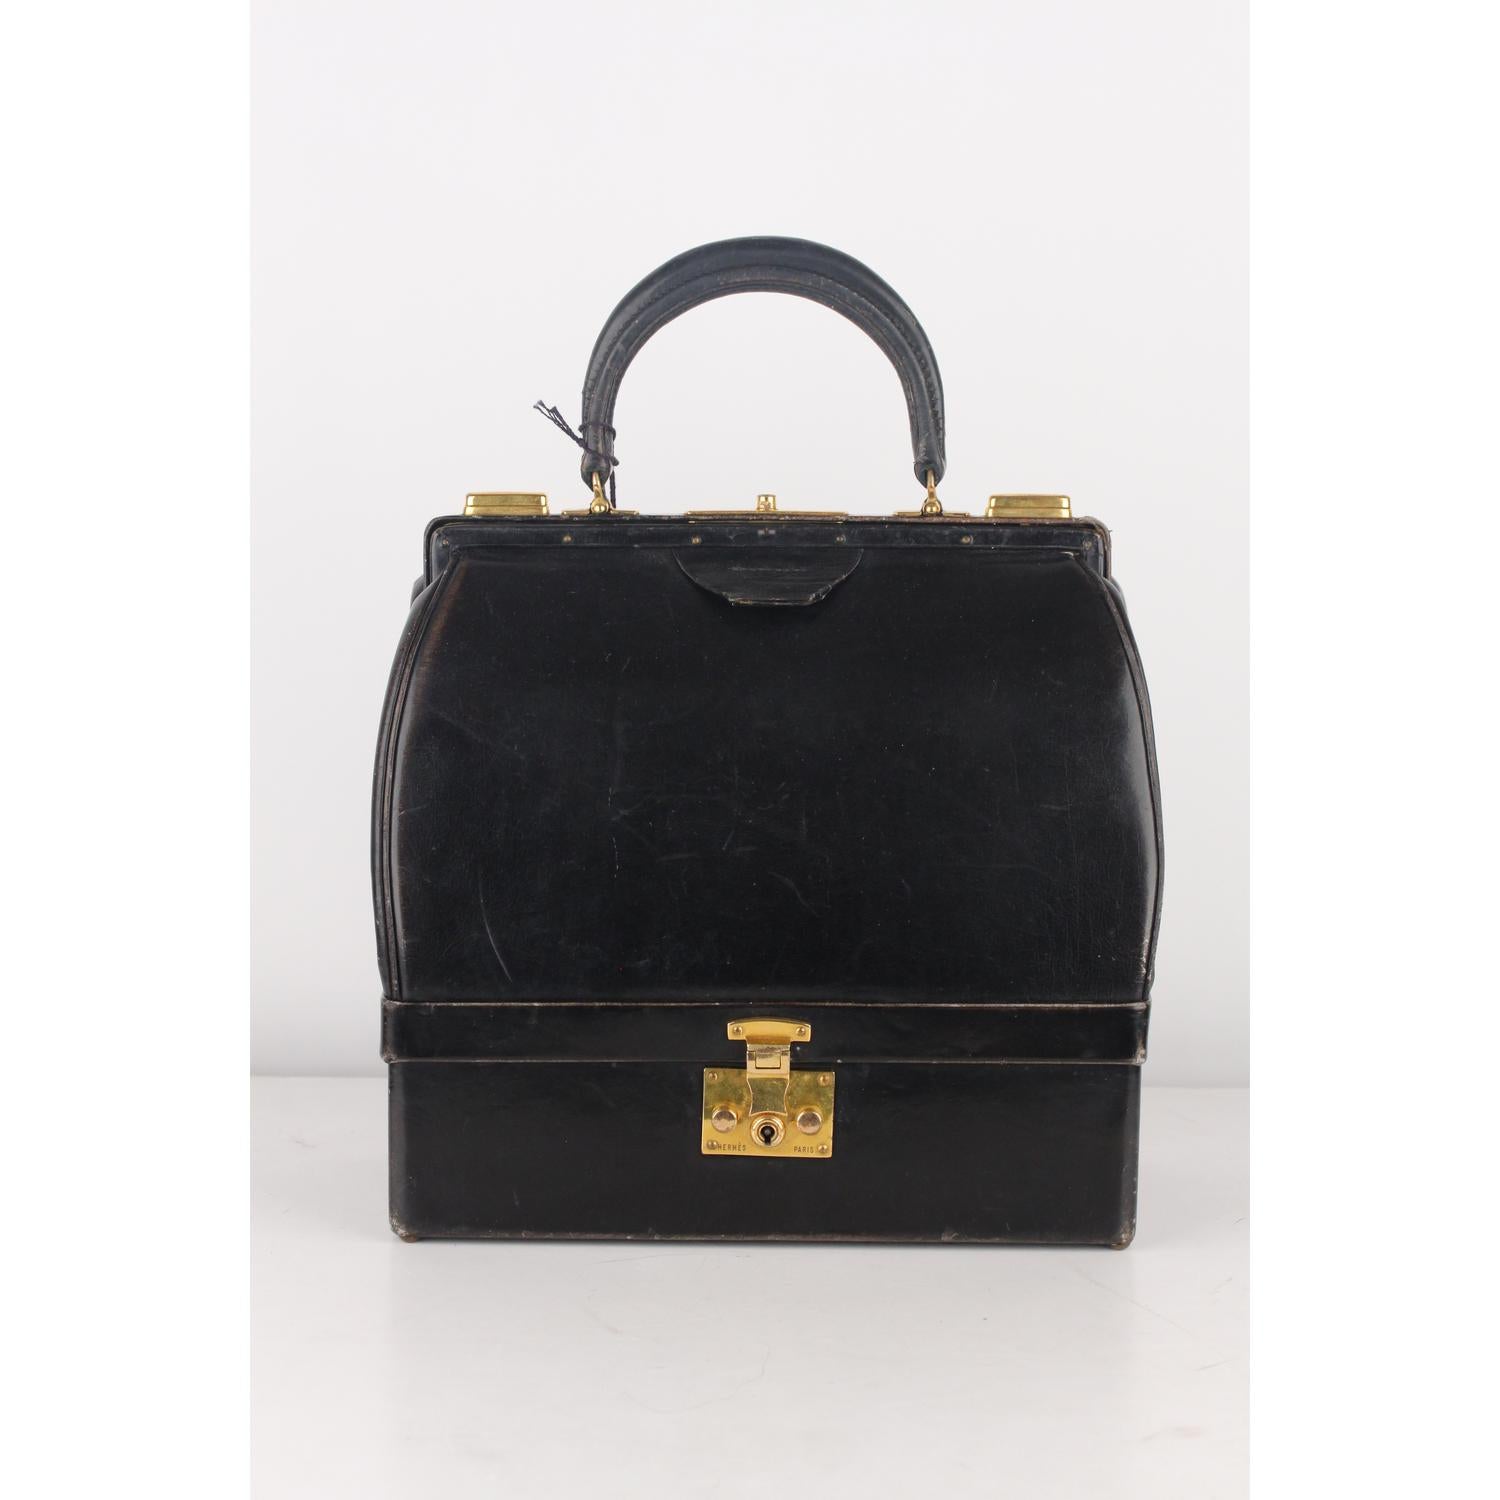 Vintage Hermes 'Sac Mallette black leather structured handbag with bottom compartment.The bag was particularly favored by wealthy women in the 1950s and 1960s who, when traveling, could carry their fine jewelry with them. Upper push closure + double